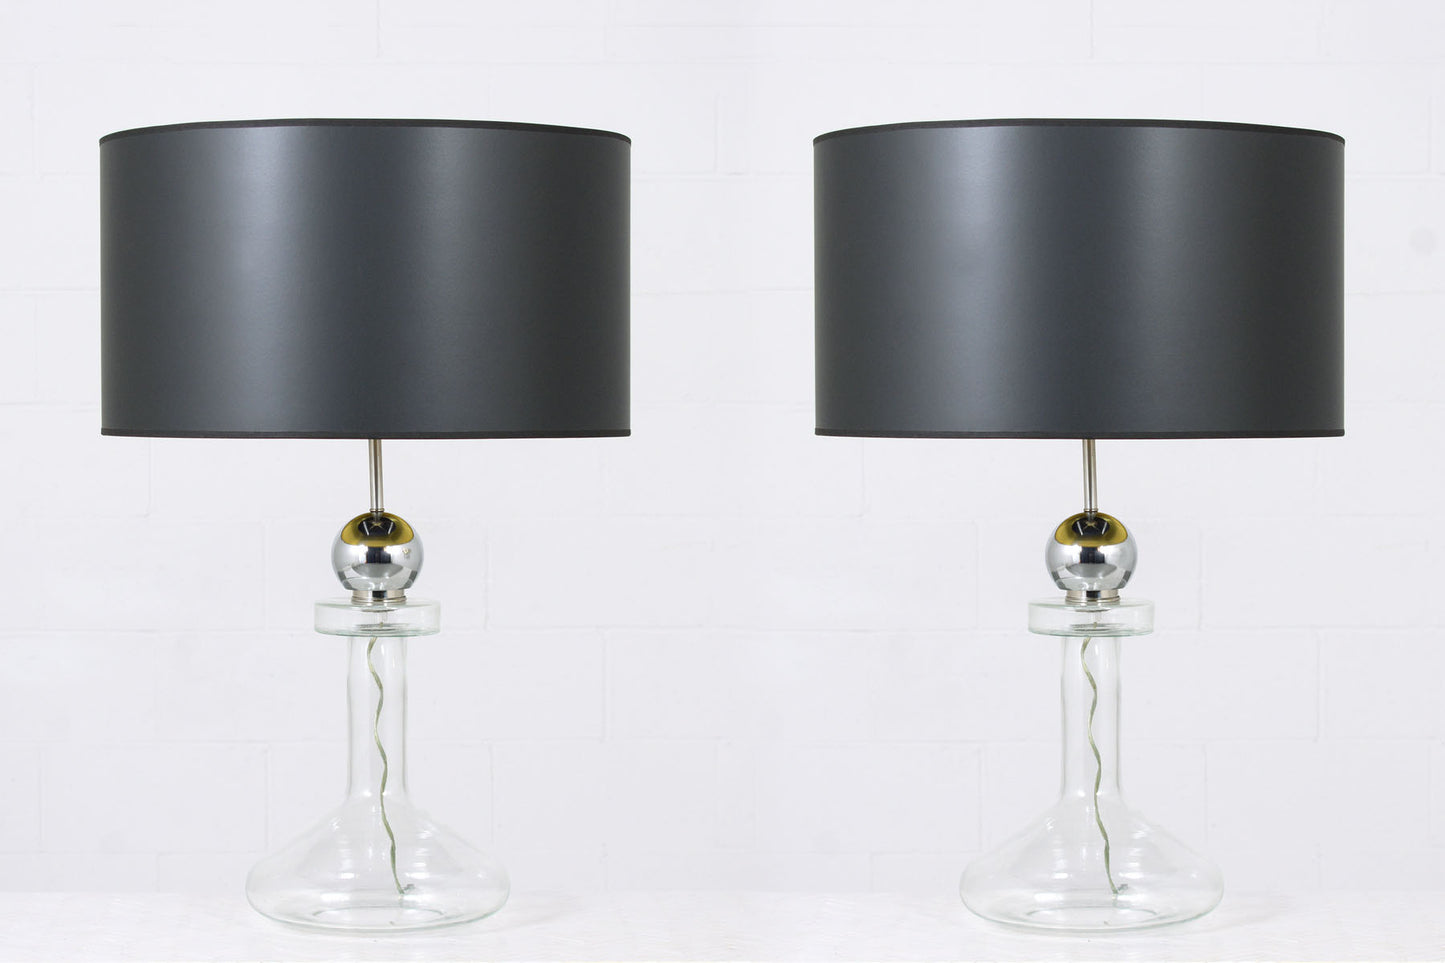 Pair of Vintage Mid-Century Modern Glass Table Lamps